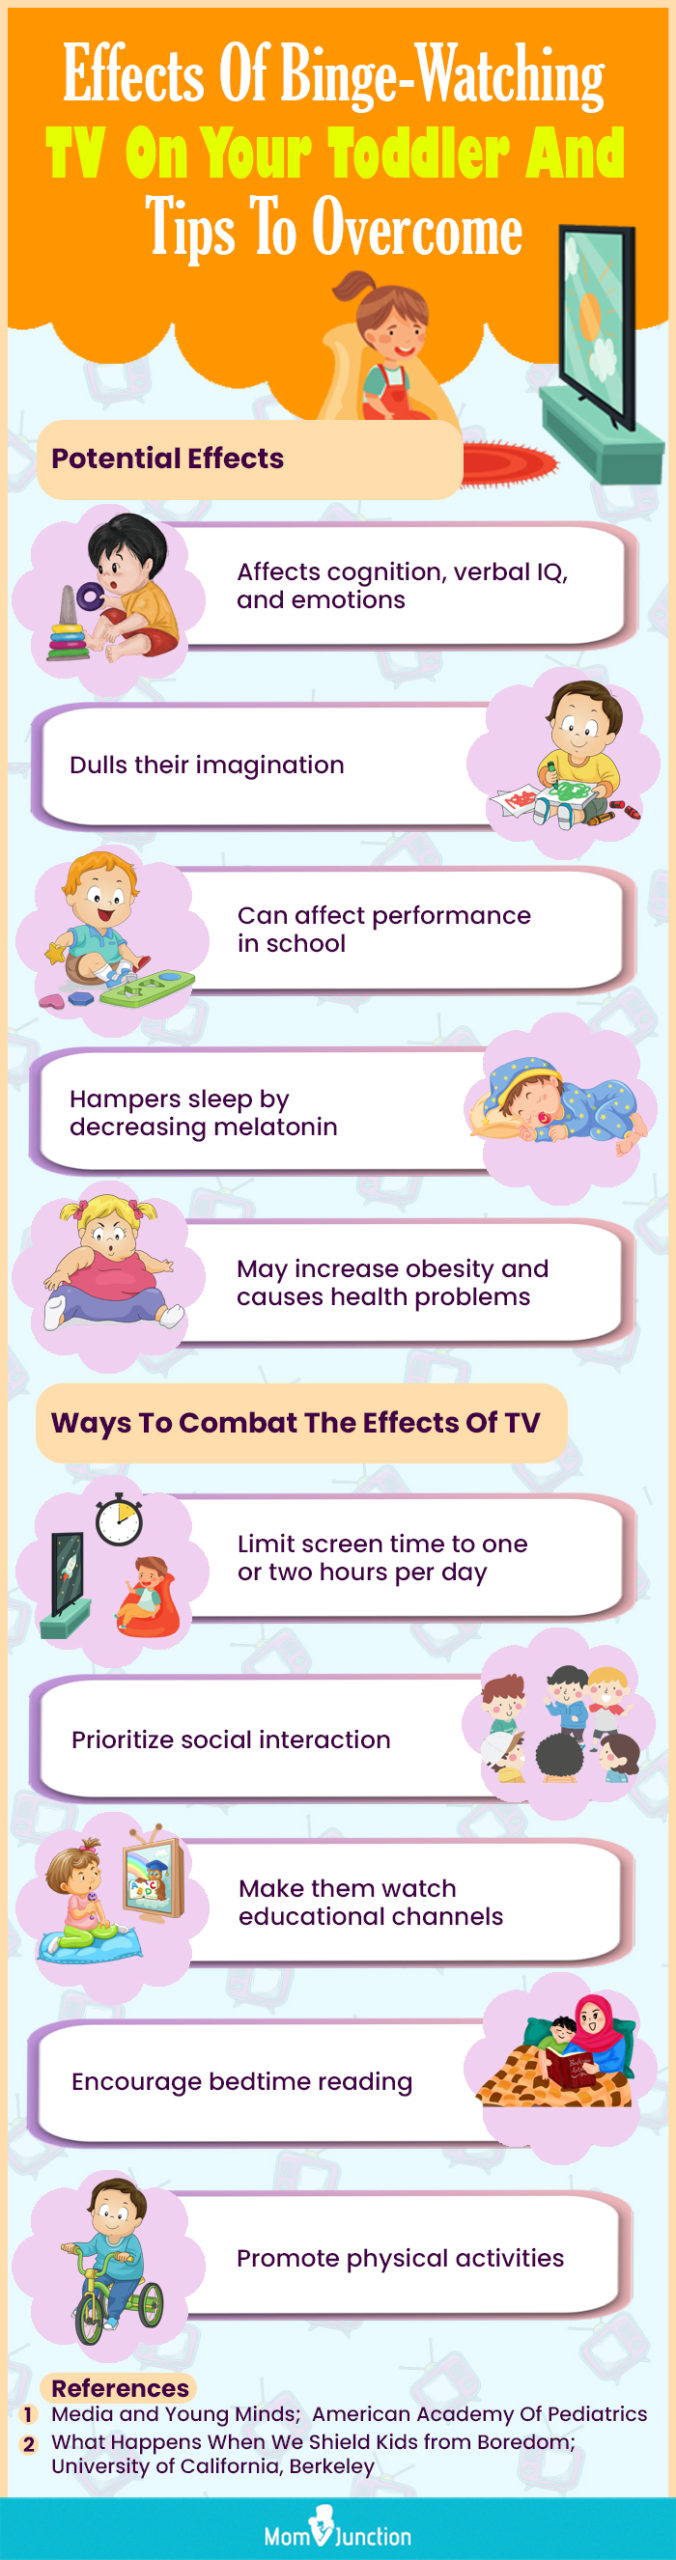 effects of binge watching tv on your toddler and tips to overcome (infographic)